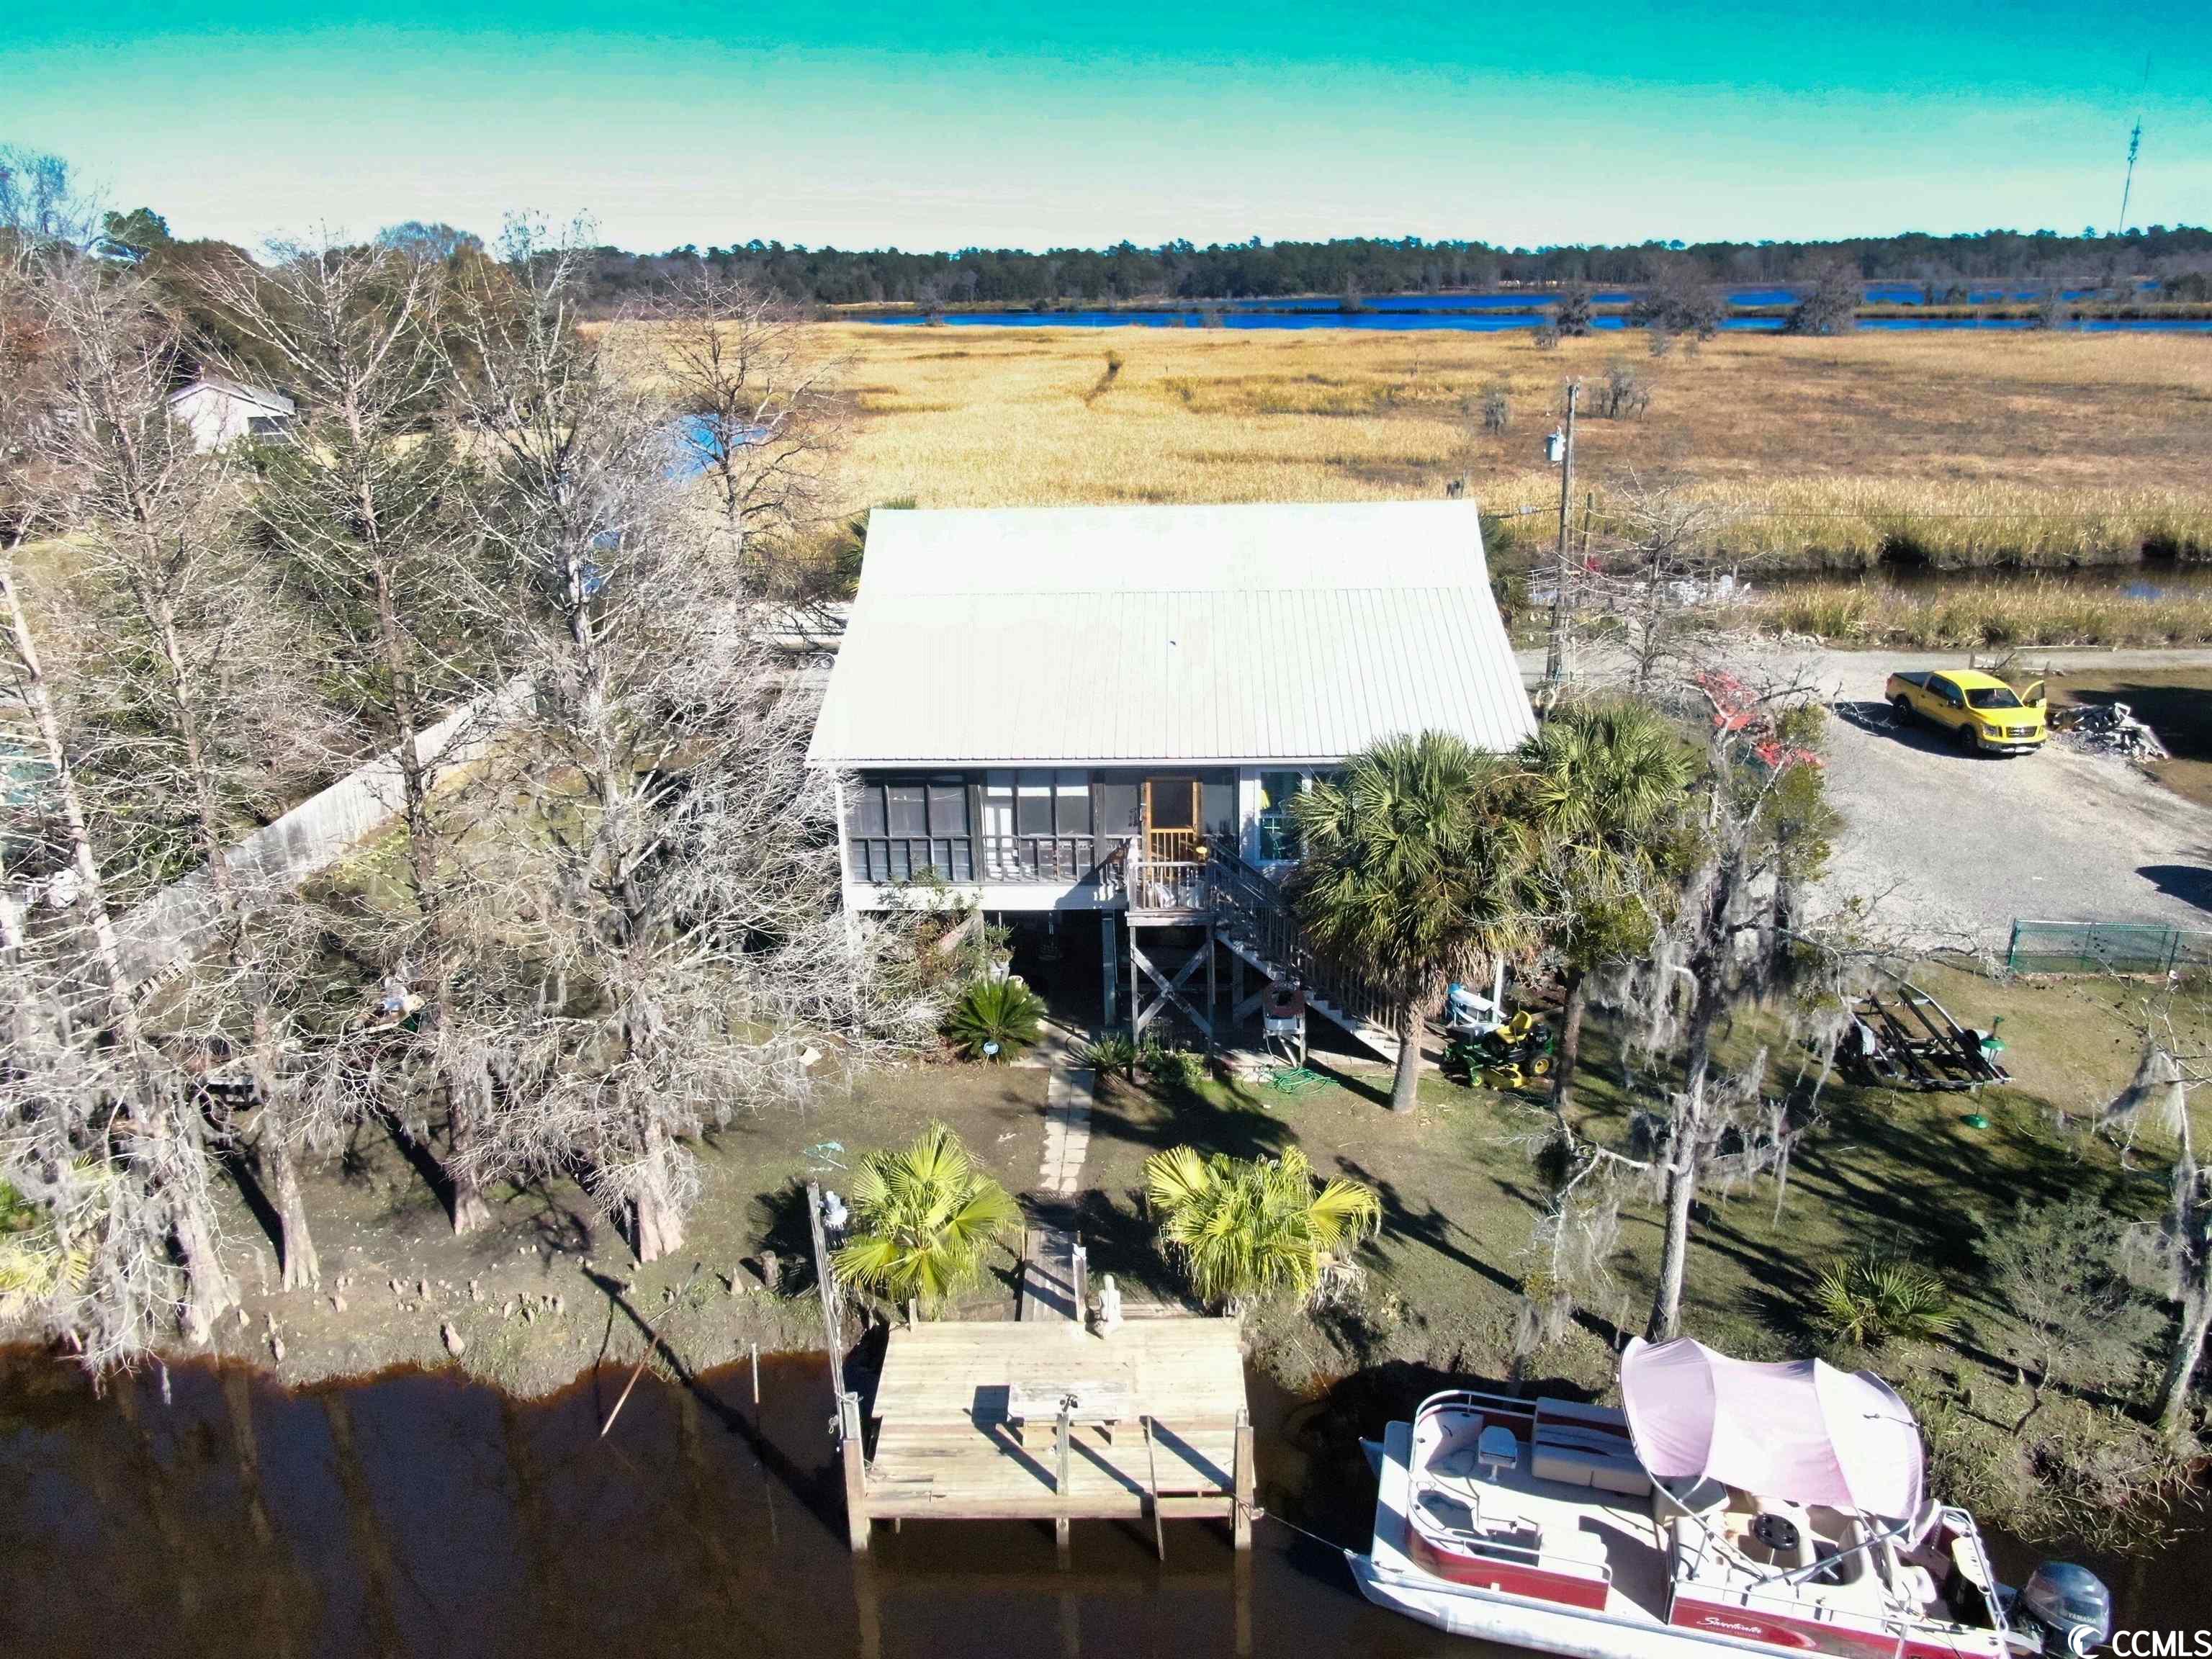 welcome to 72 catfish lane, a rare waterfront opportunity in the historic charm of georgetown, sc. this one-of-a-kind property offers a rare – dual waterfront access. surrounded by black river access on two sides, this home is a haven for water enthusiasts and nature lovers alike. whether you choose to journey by boat or car, the vibrant downtown georgetown is just a short distance away.  at the heart of this property are the two recently refurbished floating docks, one on each side of the house, perfect for boating enthusiasts. the front dock is equipped with 220 shore power and water, catering to all your boating needs. the deep-water creek/channel adds to the allure, promising endless aquatic adventures.  built in the classic raised beach style, this house boasts a rustic southern river house aesthetic. its open floor plan invites airy, comfortable living, ideal for a tranquil retreat, a lucrative airbnb rental, or a cherished primary residence. imagine relaxing on the serene front porch, overlooking the river and more than 100 acres of conservation ricefields and marsh land, where nature’s tranquility reigns supreme.  the interior is graced with hardwood floors, adding warmth and elegance to the space. the house features a spacious, enclosed carolina room at the rear, offering water views – a perfect spot for relaxation or entertaining.  additionally the hvac  recently replaced in 2021.  72 catfish lane is more than a house; it's a lifestyle, offering a perfect blend of waterfront living, historic charm, and modern amenities. it's an opportunity to own a piece of paradise, where the water is not just a view, but a way of life.